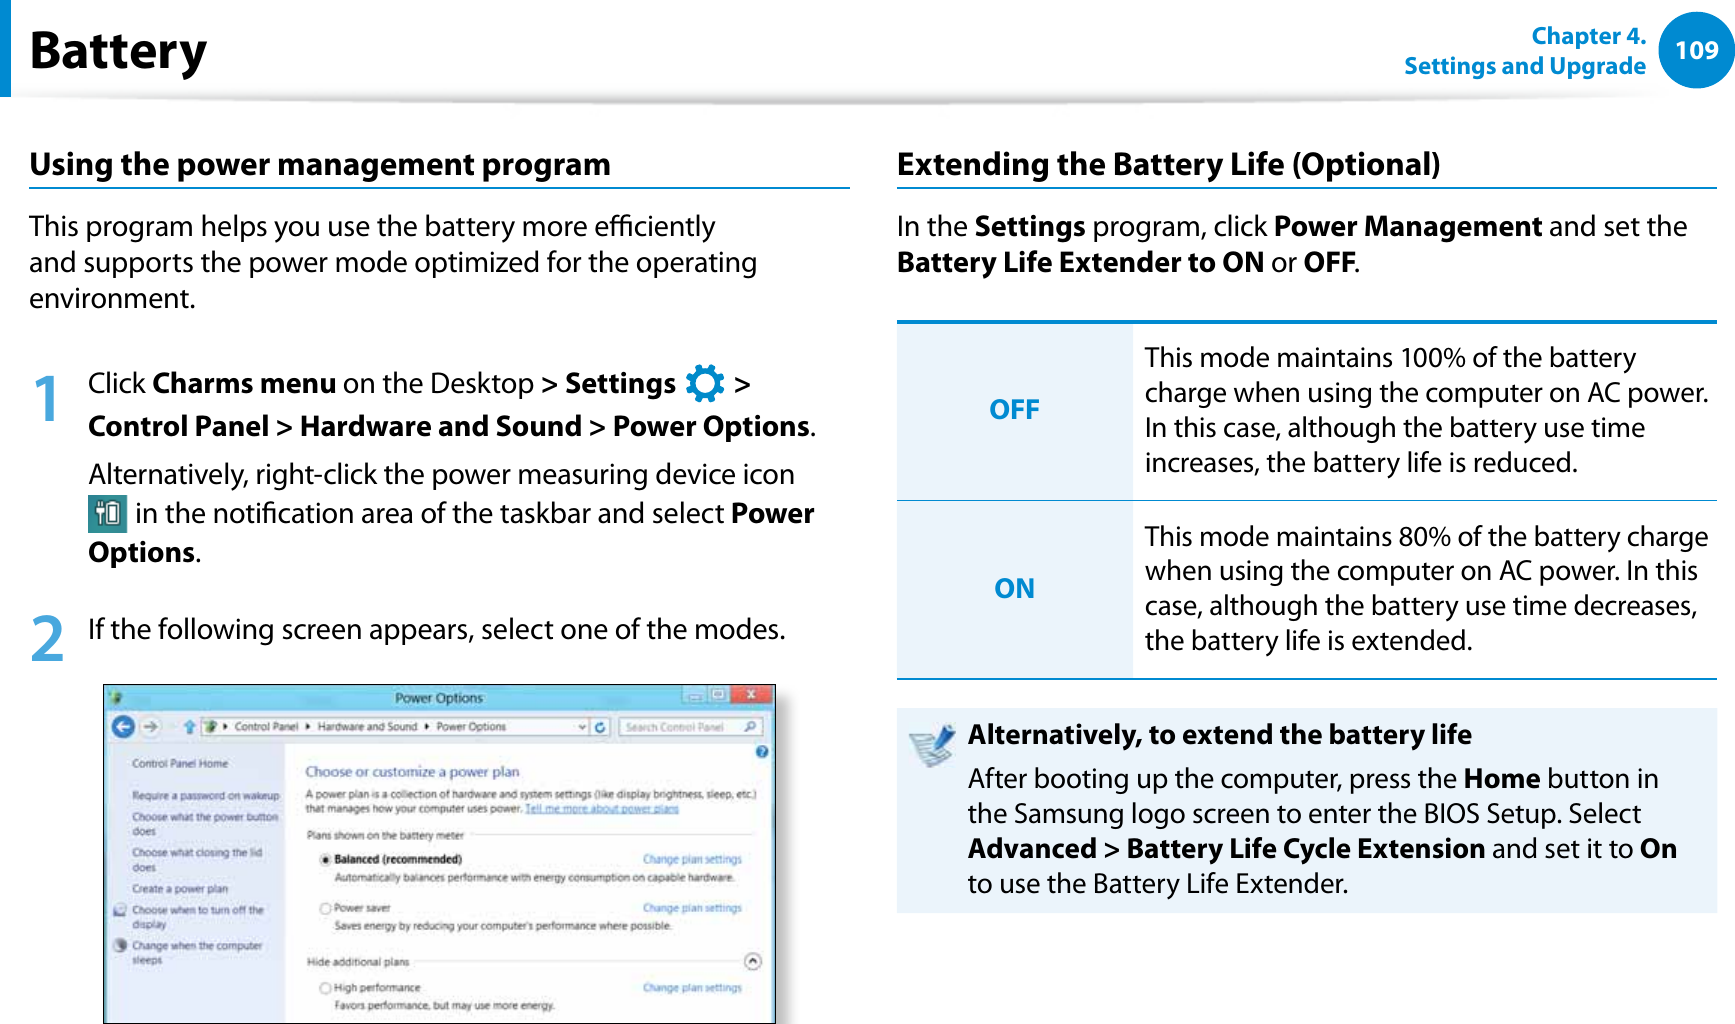 109Chapter 4. Settings and UpgradeBatteryUsing the power management programThis program helps you use the battery more eciently and supports the power mode optimized for the operating environment.1 Click Charms menu on the Desktop &gt; Settings   &gt;  Control Panel &gt; Hardware and Sound &gt; Power Options.Alternatively, right-click the power measuring device icon  in the notication area of the taskbar and select Power Options.2  If the following screen appears, select one of the modes.Extending the Battery Life (Optional)In the Settings program, click Power Management and set the Battery Life Extender to ON or OFF. OFFThis mode maintains 100% of the battery charge when using the computer on AC power. In this case, although the battery use time increases, the battery life is reduced.ONThis mode maintains 80% of the battery charge when using the computer on AC power. In this case, although the battery use time decreases, the battery life is extended. Alternatively, to extend the battery lifeAfter booting up the computer, press the Home button in the Samsung logo screen to enter the BIOS Setup. Select Advanced &gt; Battery Life Cycle Extension and set it to On to use the Battery Life Extender.